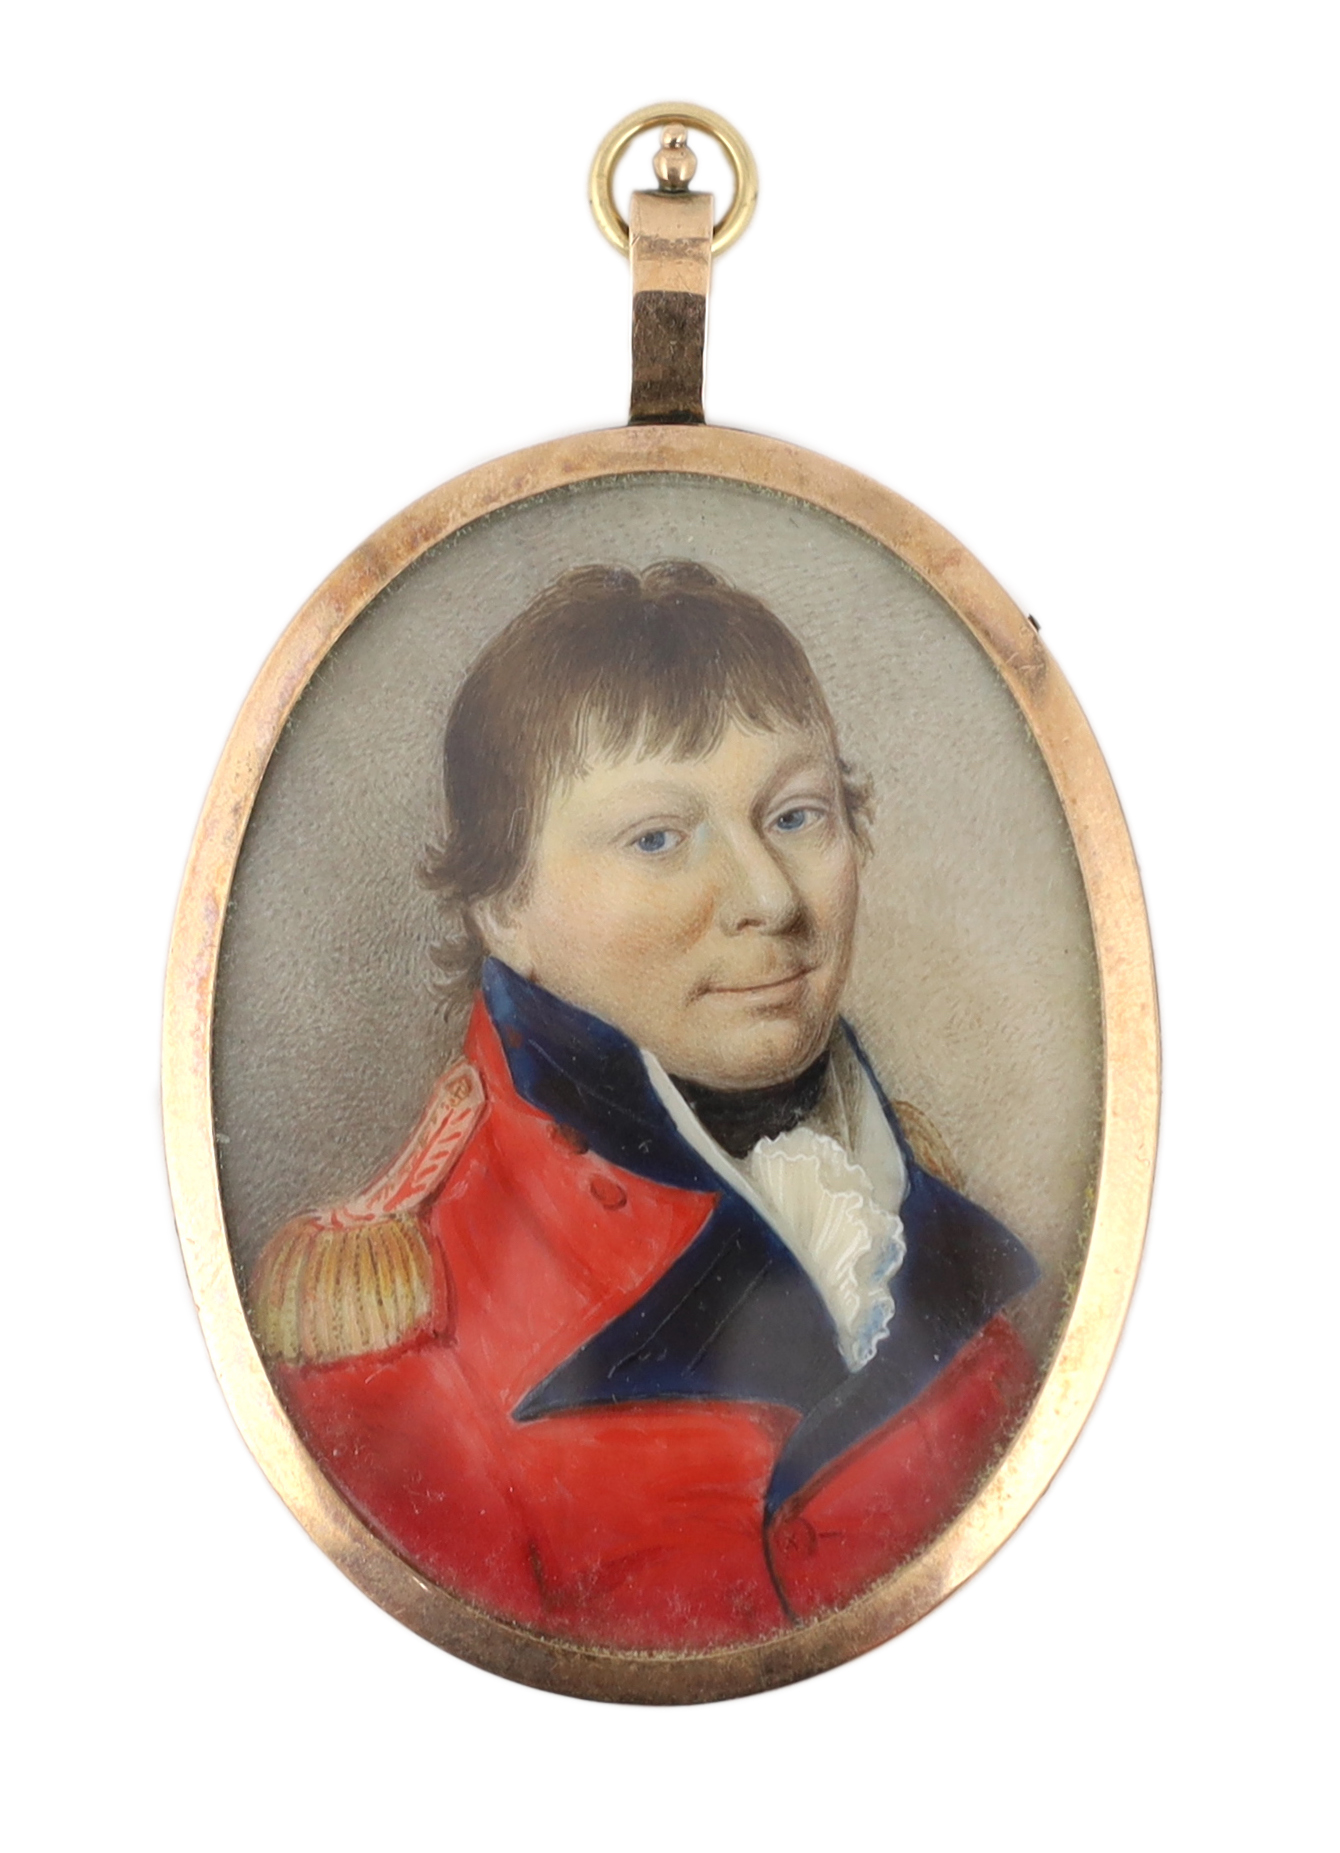 English School circa 1800, Portrait miniature of an army officer, watercolour on ivory, 5.4 x 4.1cm. CITES Submission reference BJJY18BG